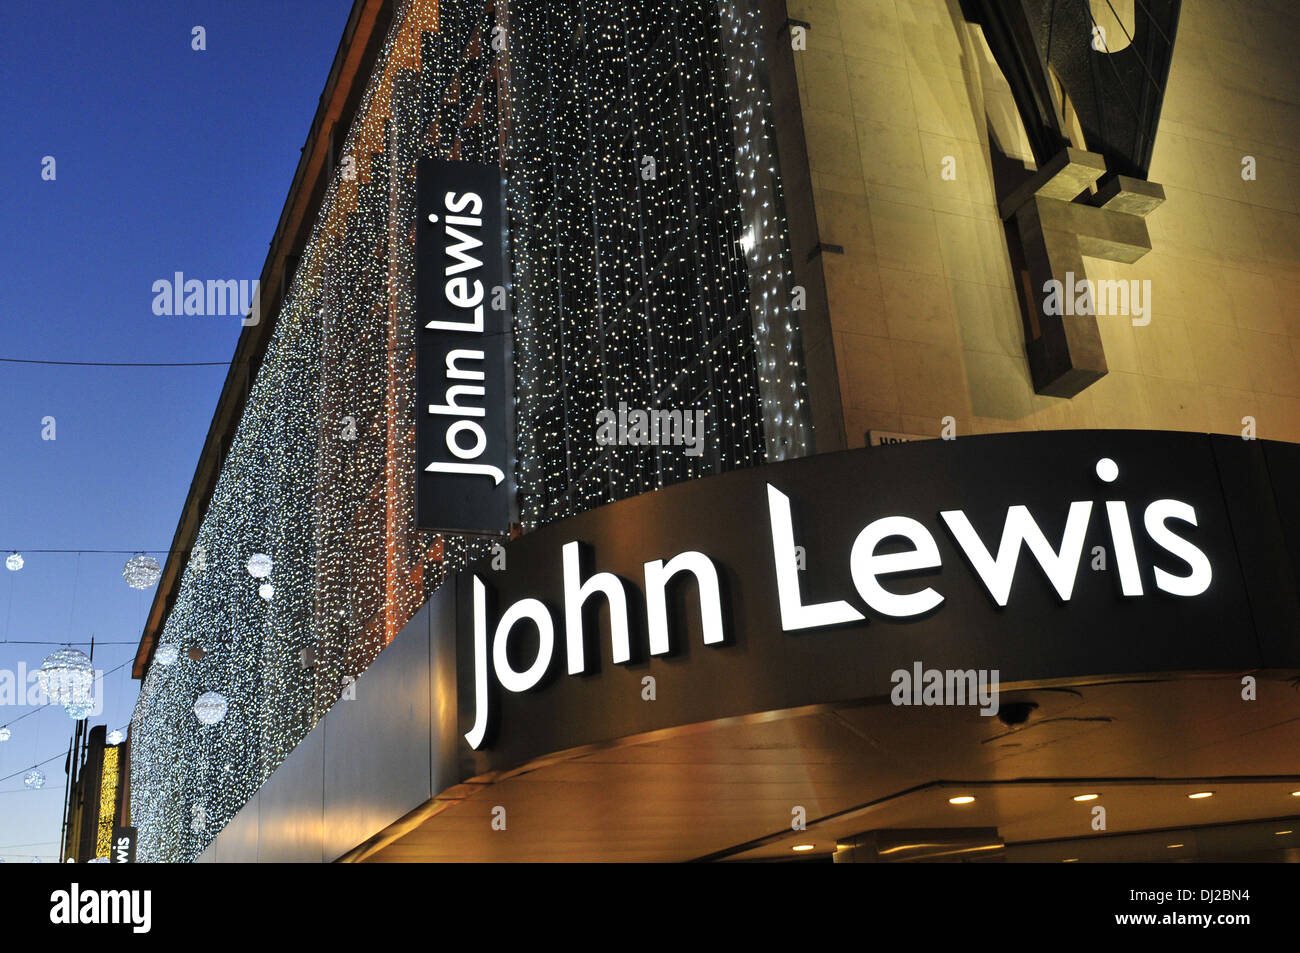 A close up view of John Lewis on Oxford Street, with Christmas decorations Stock Photo